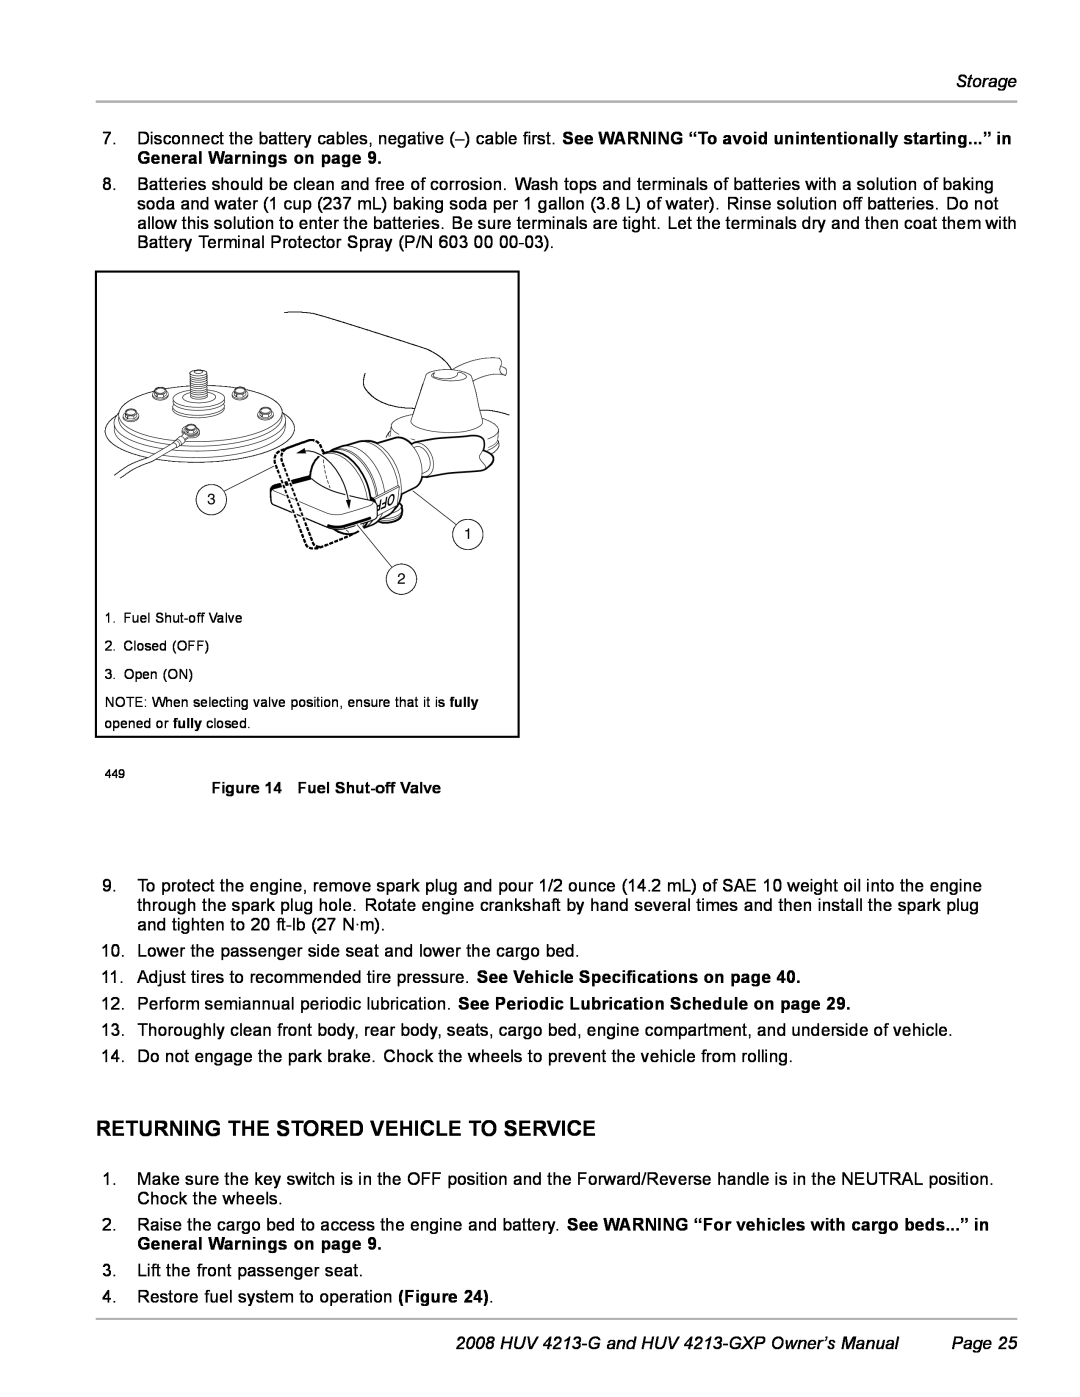 Husqvarna HUV 4213-GXP owner manual Returning The Stored Vehicle To Service, General Warnings on page 